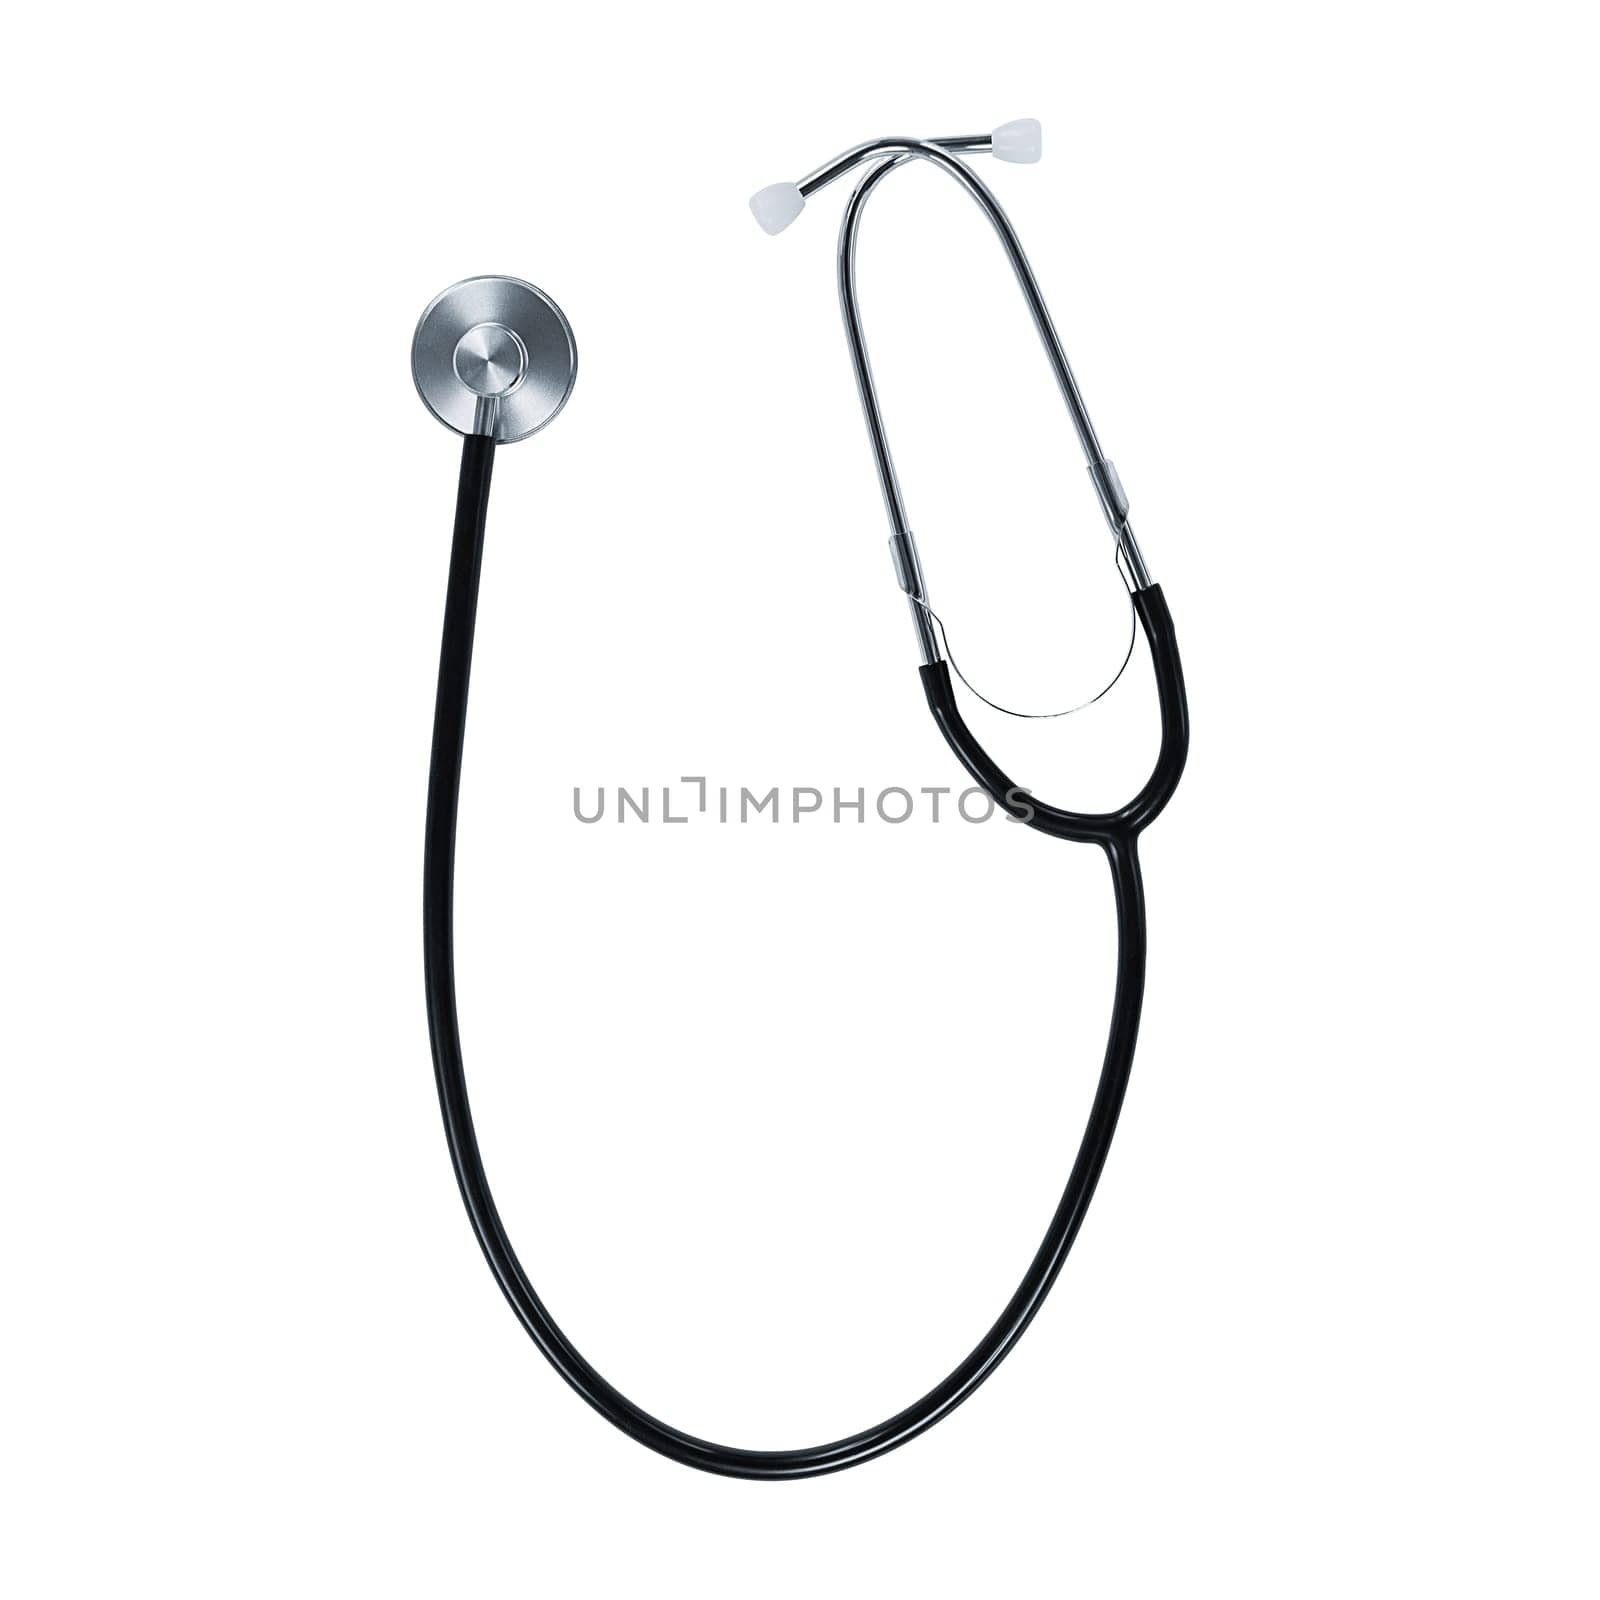 Black stethoscope isolated on a white background. Stock photo by anna_artist